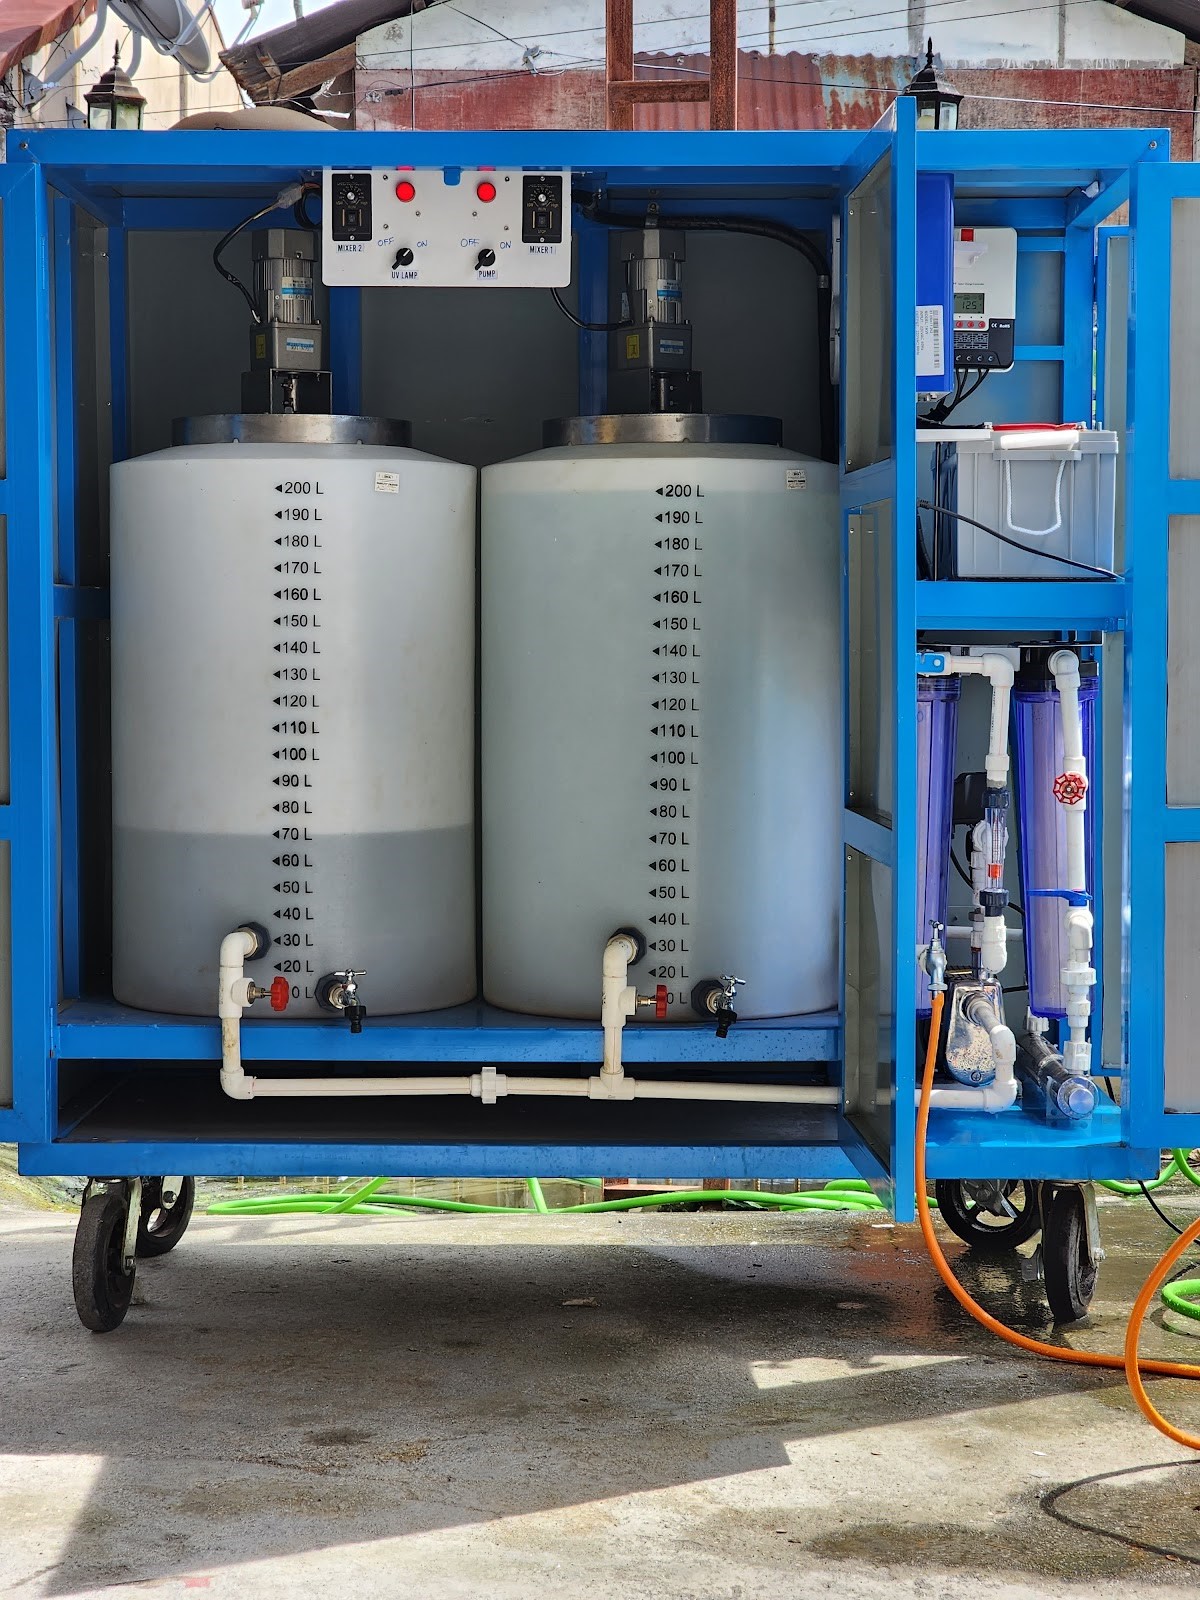 004_Mobile_Water_Disinfection_System.jpg